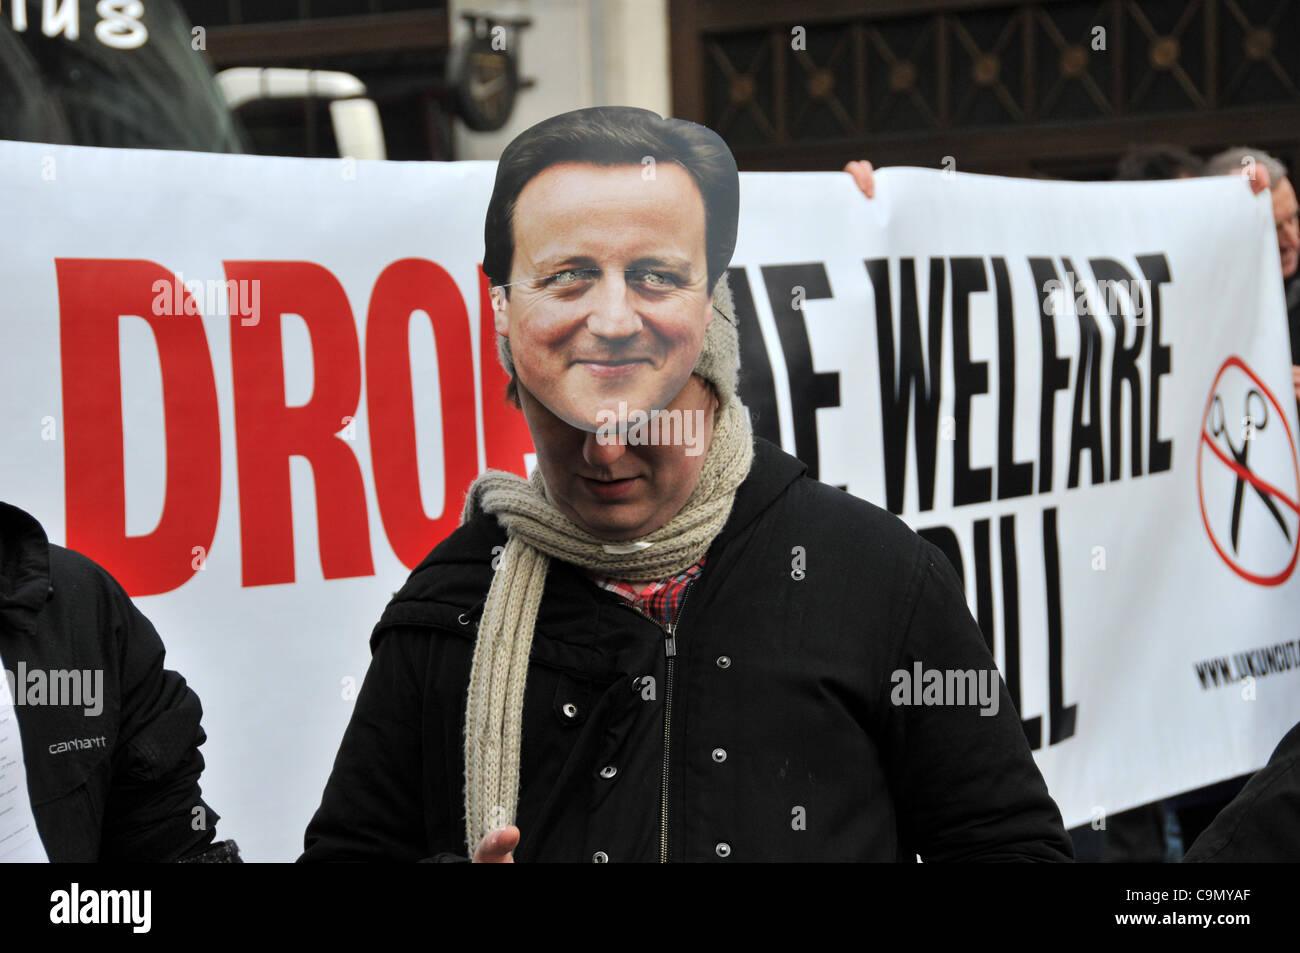 Protesters against the Welfare Reform Bill wearing a David Cameron mask and UKUncut block Oxford Circus Saturday 28/1/12.  Wheelchair users are chained together across the road outside Niketown. Stock Photo